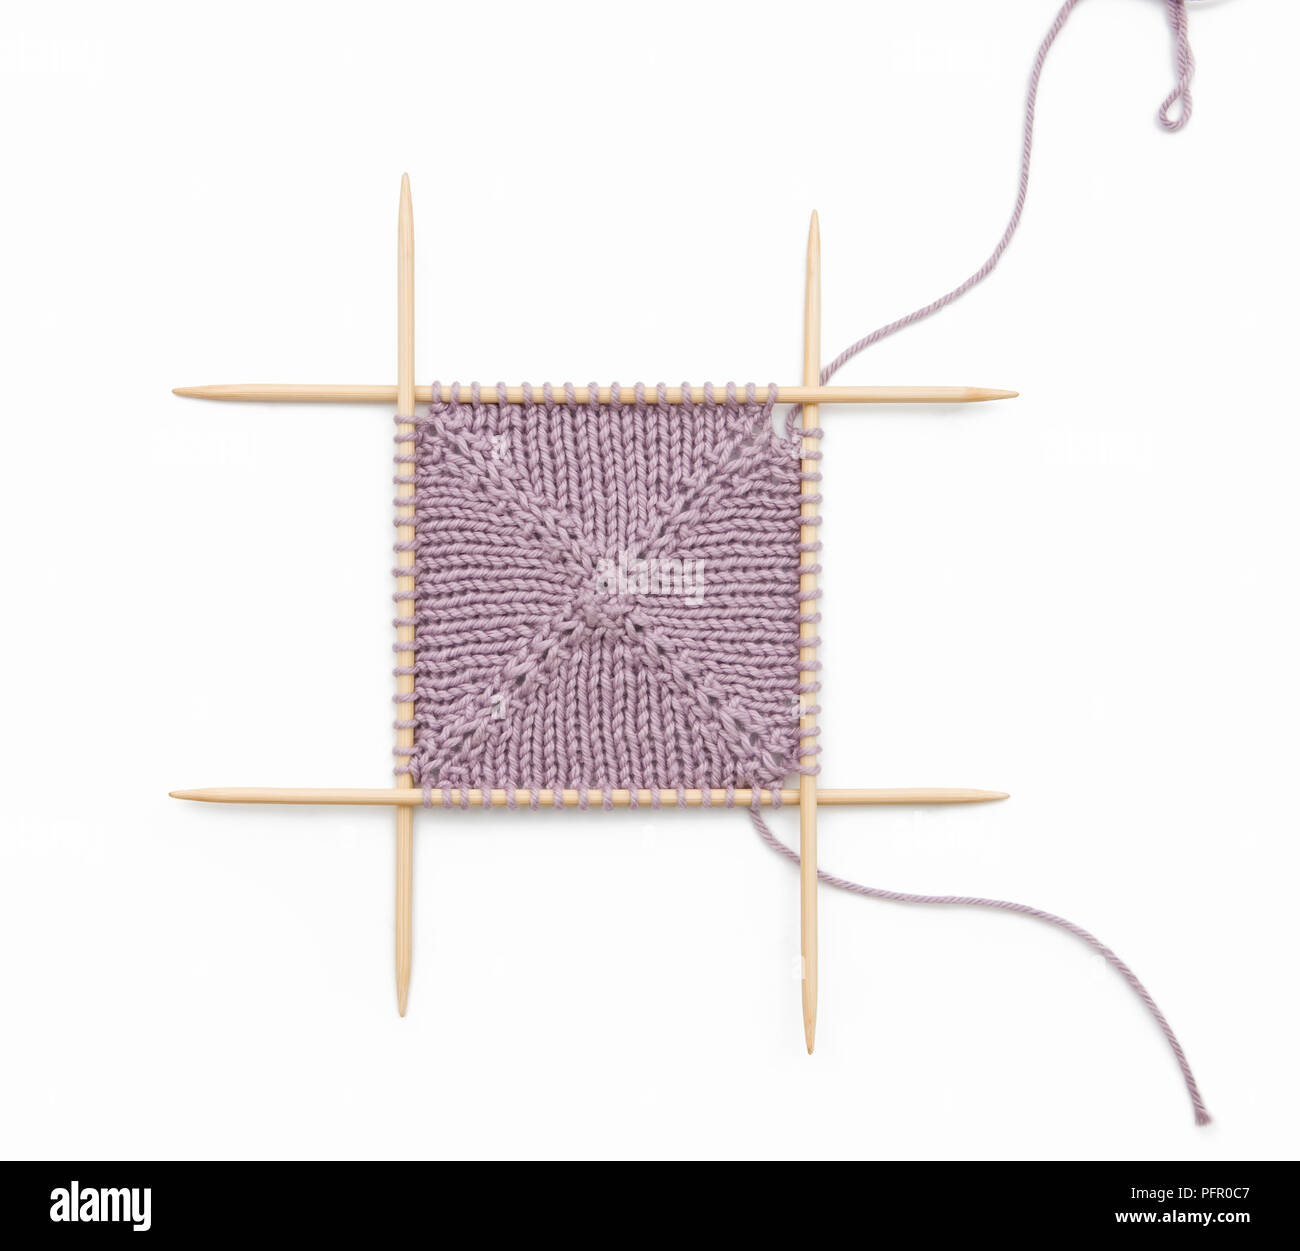 Purple knitted square inside four double-pointed needles Stock Photo